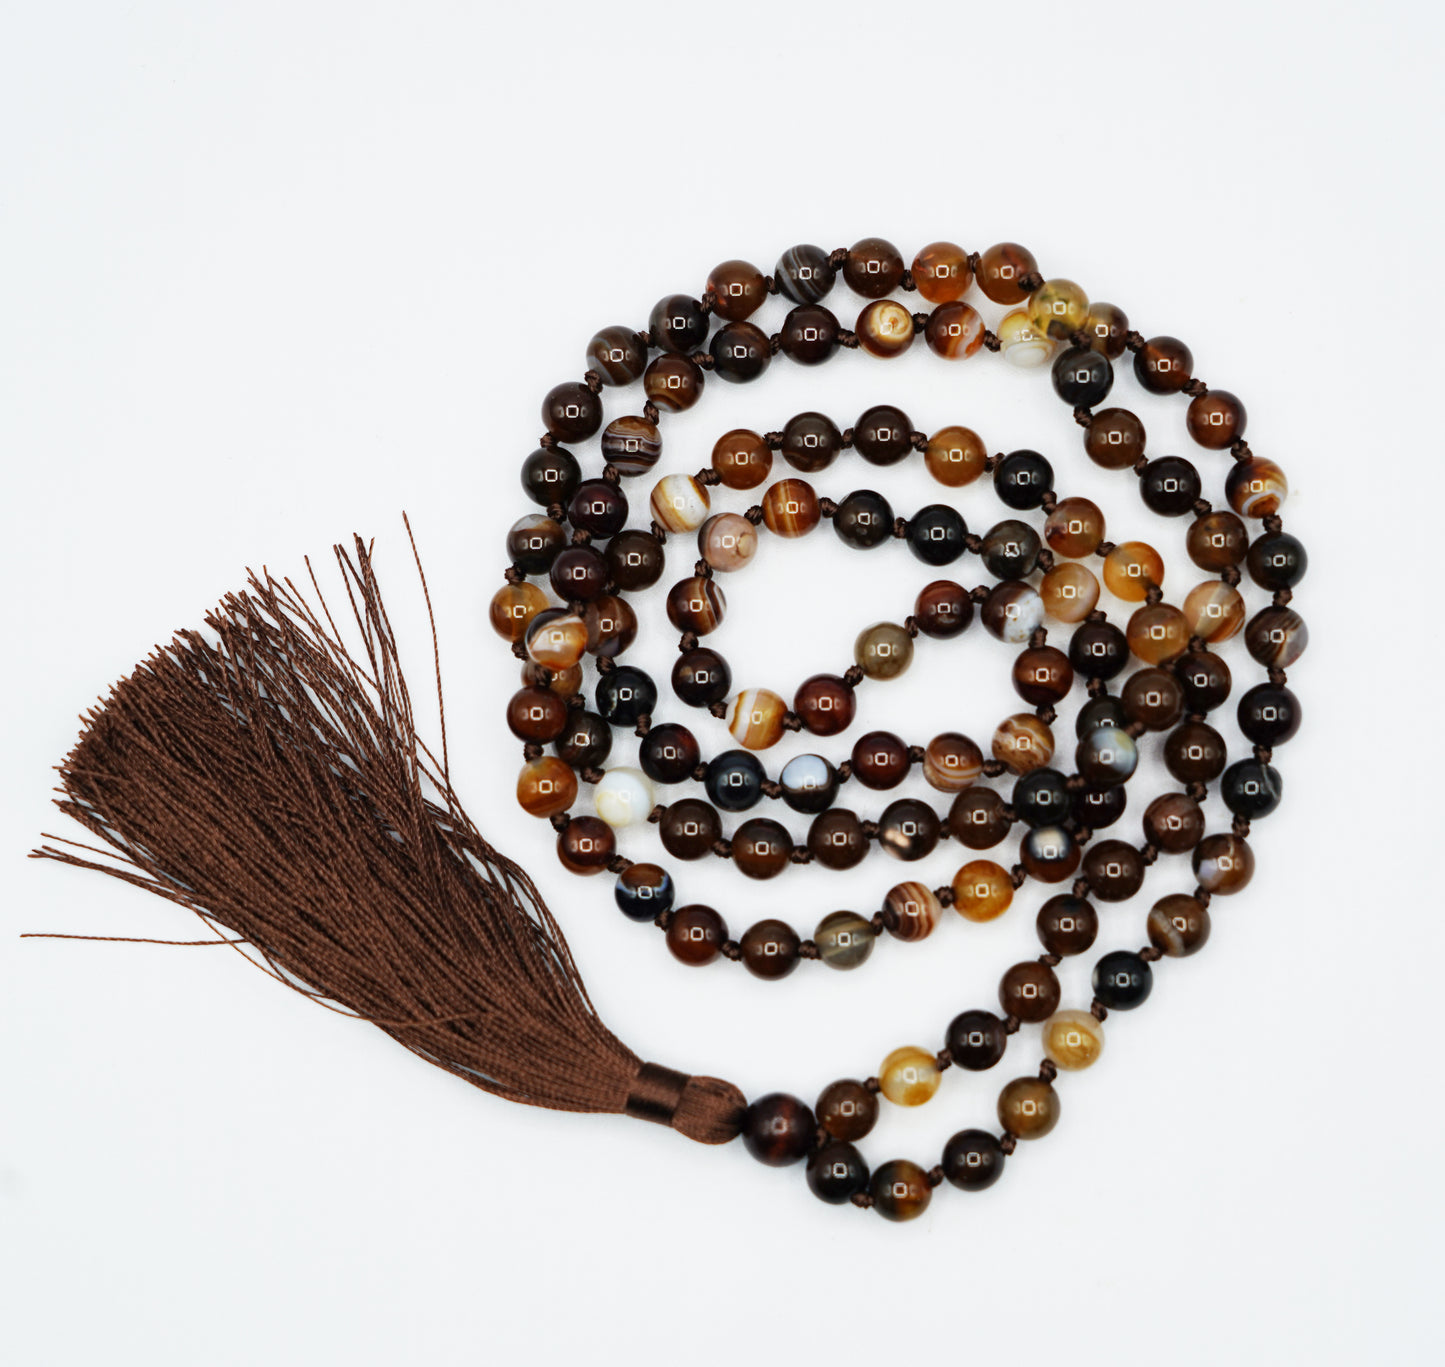 Cerridwen's Powerful Energy - Mala DARK Goddess Intention Beads of Coffee Banded Agate